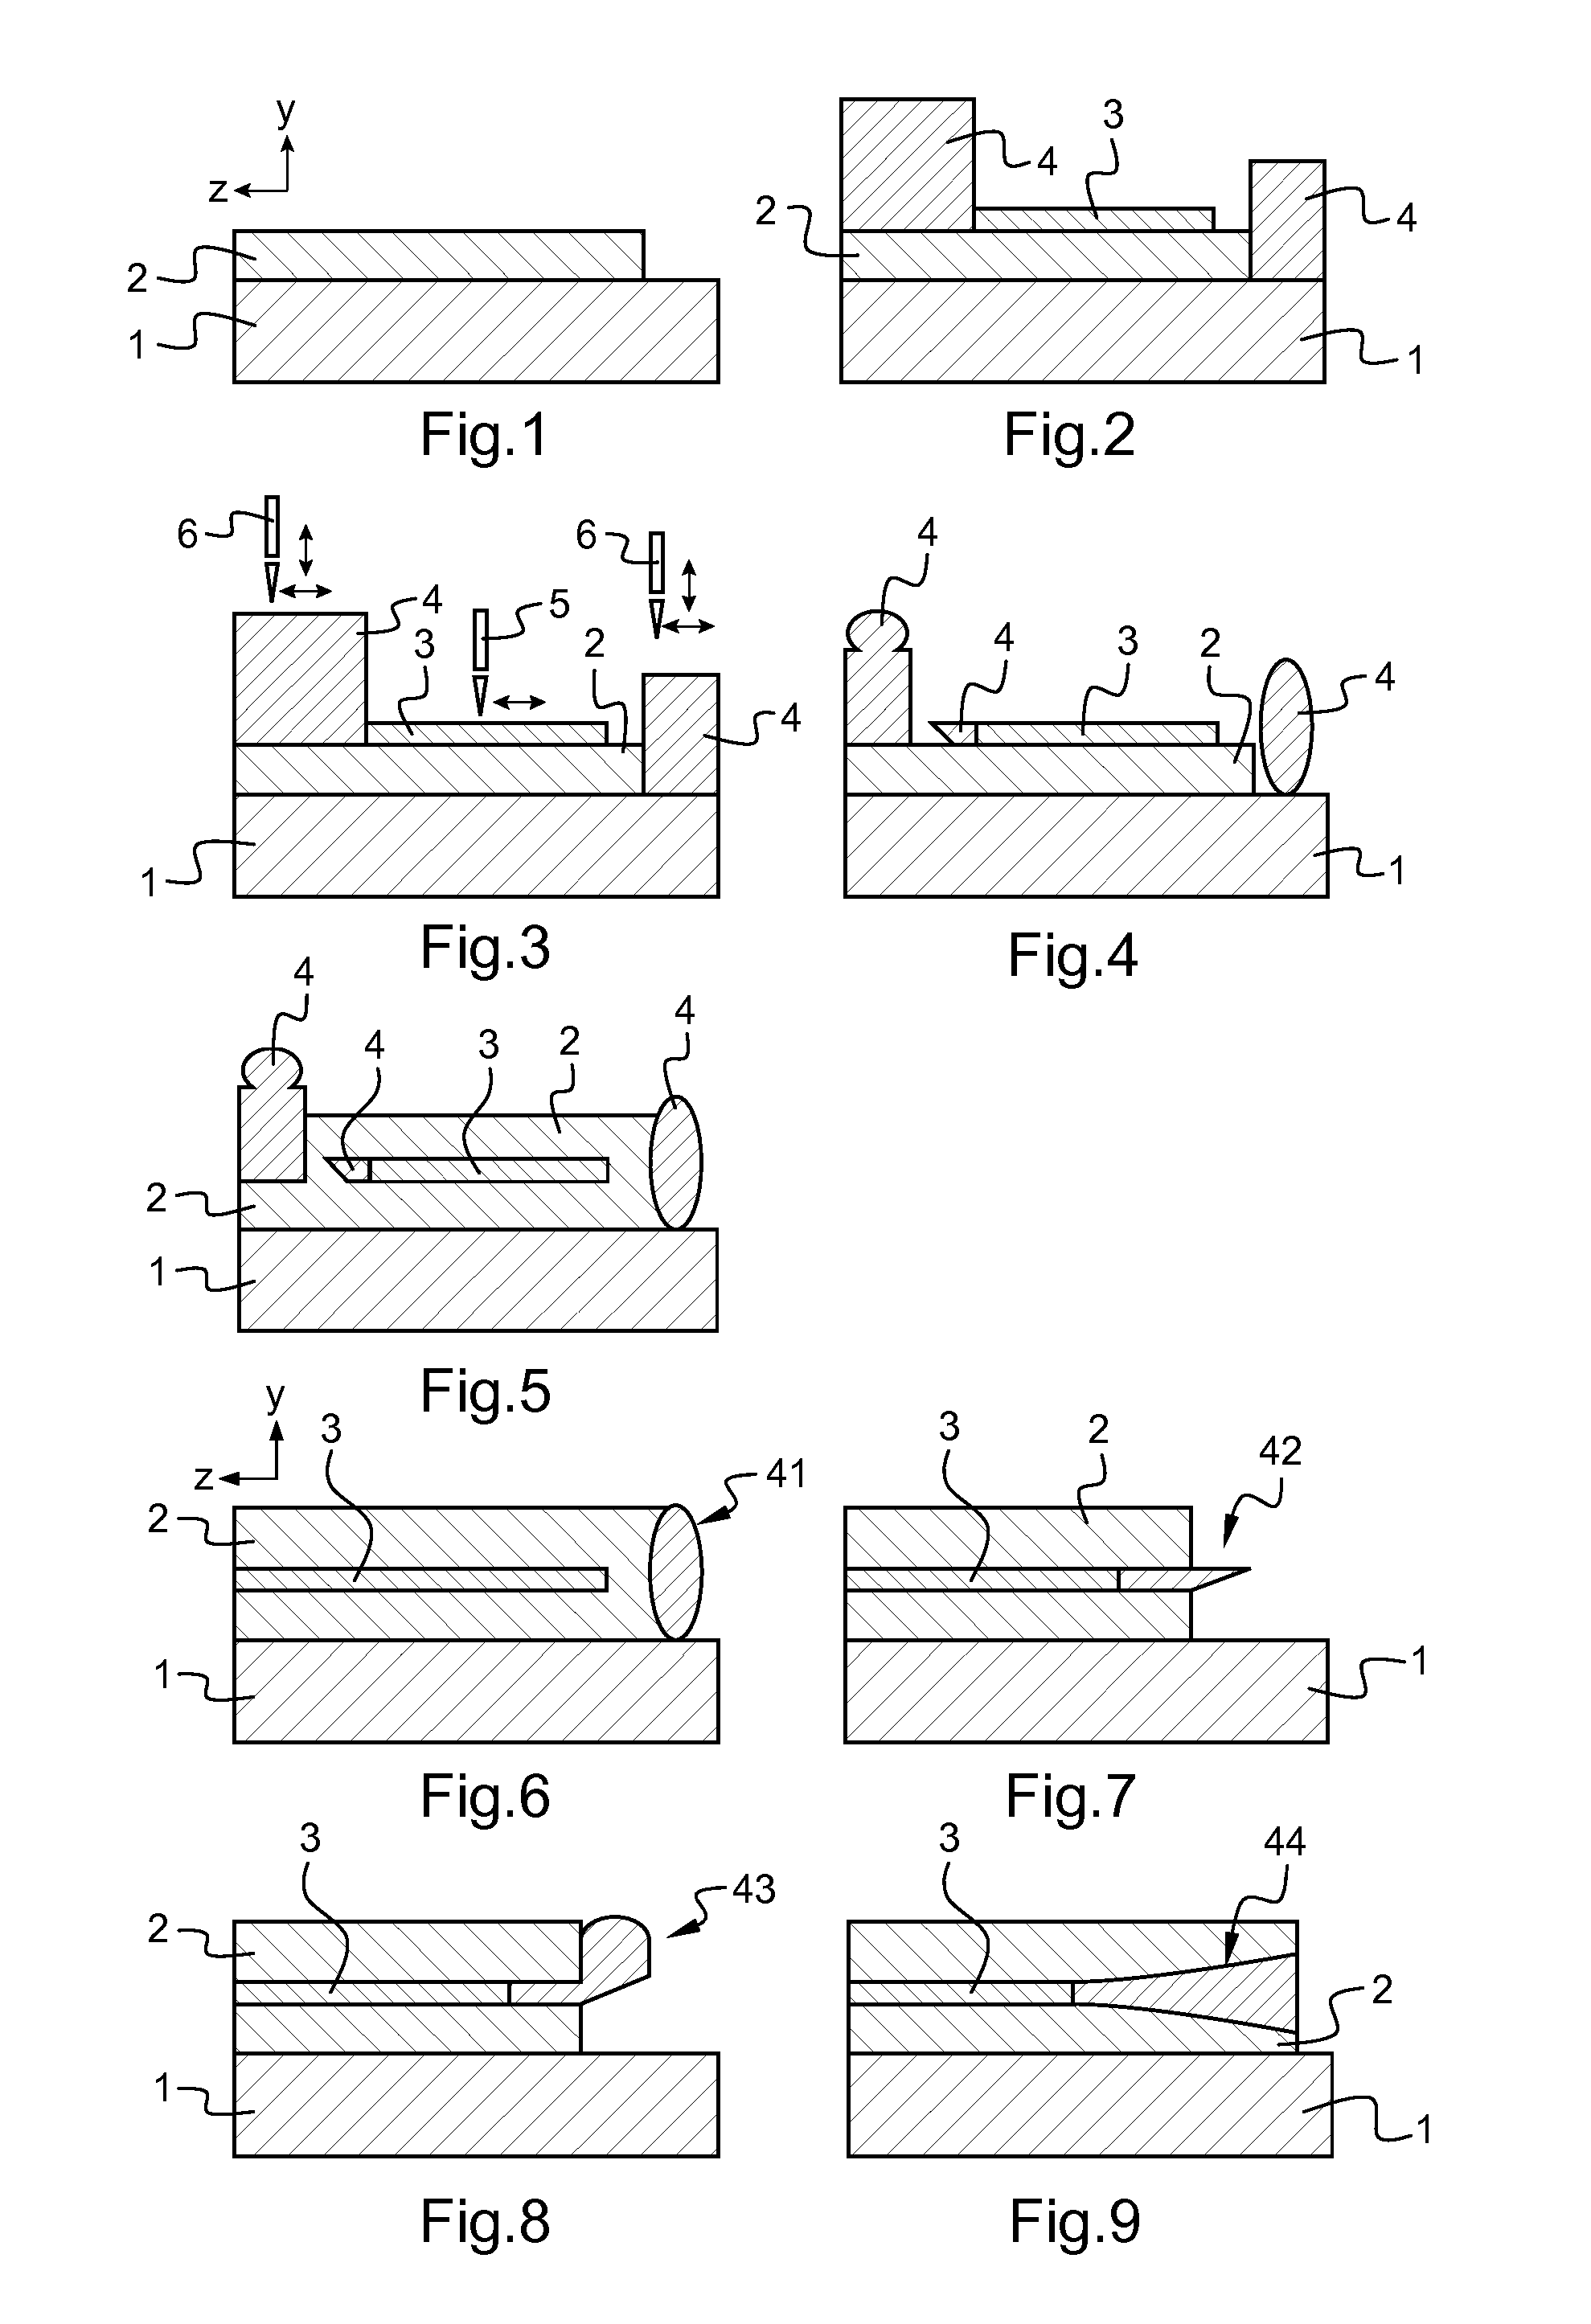 Method of manufacturing a three dimensional photonic device by two photon absorption polymerization